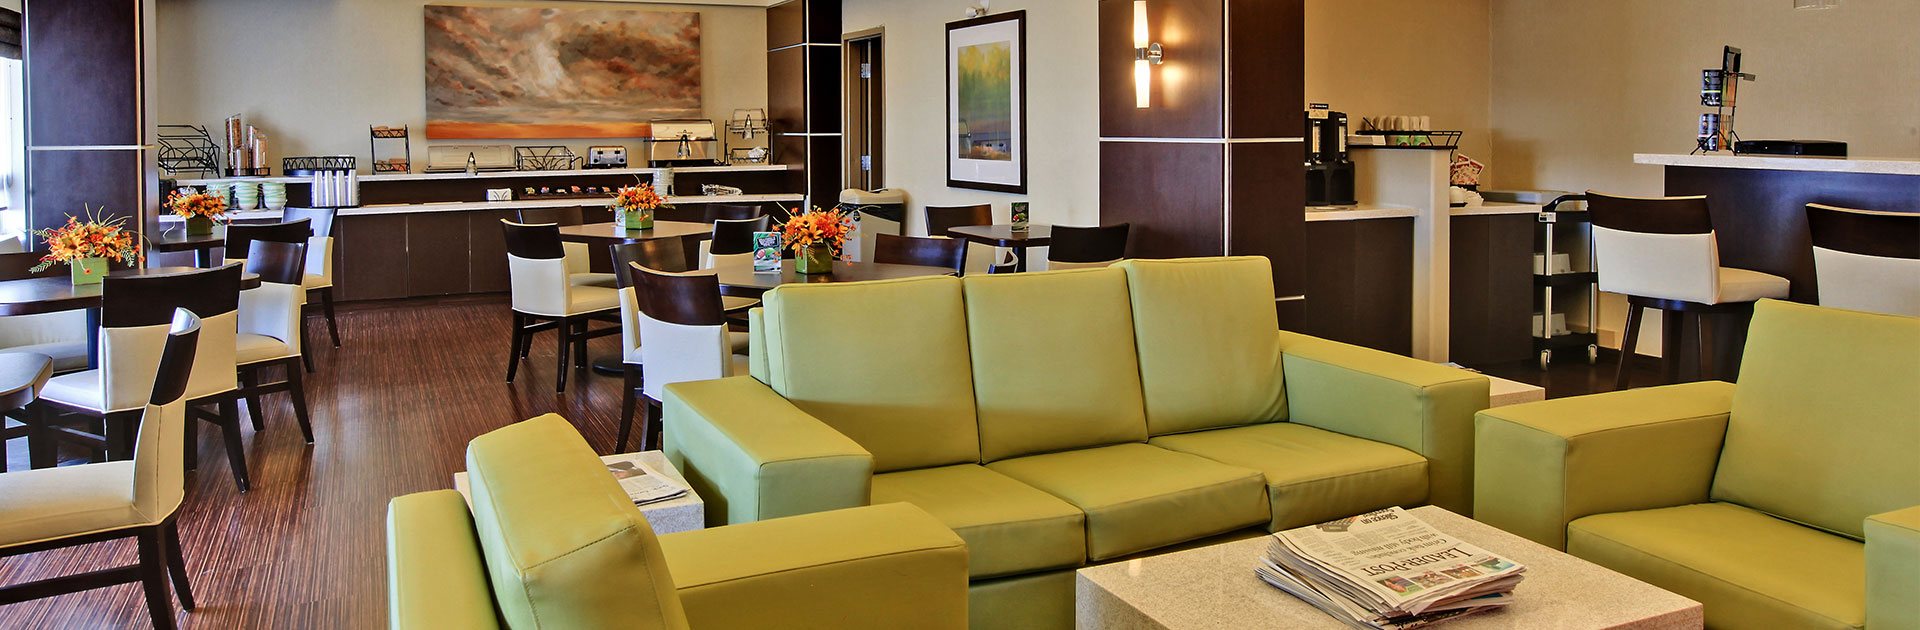 A modern furniture set is featured in the lounge space at d3h Home Inn & Suites Yorkton: a vinyl chartreuse green sofa and armchair set is matched to solid cube shaped coffee and end tables.  A coffee bar is set in a secluded corner next to the breakfast area, while a two-tiered elongated counter, bearing stainless steel appliances and eating ware, is lined up against the back wall of the dining area.  A series of square tables and white upholstered dining chairs are placed throughout the space.